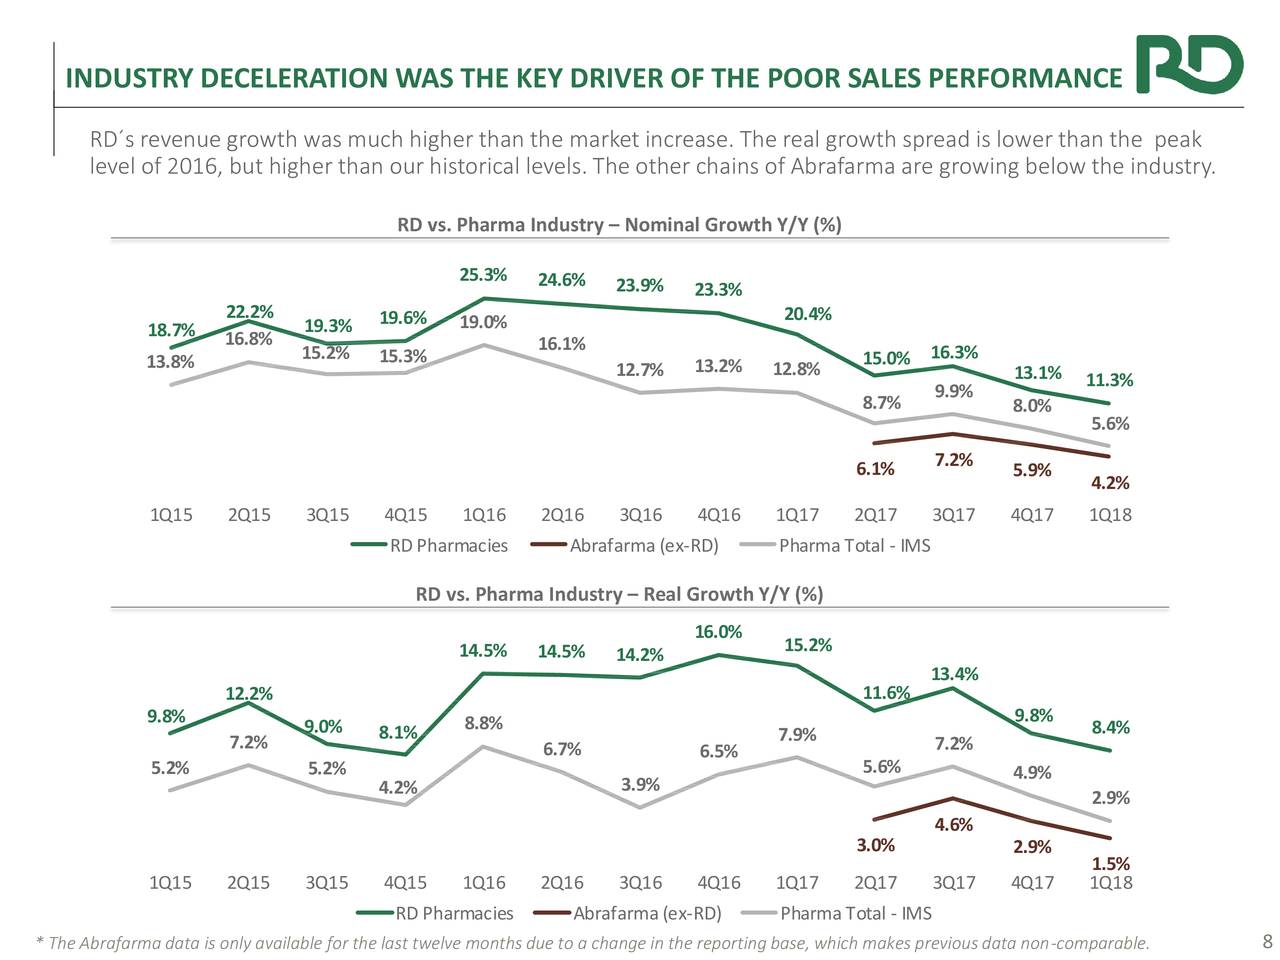 INDUSTRY DECELERATION WAS THE KEY DRIVER OF THE POOR SALES PERFORMANCE